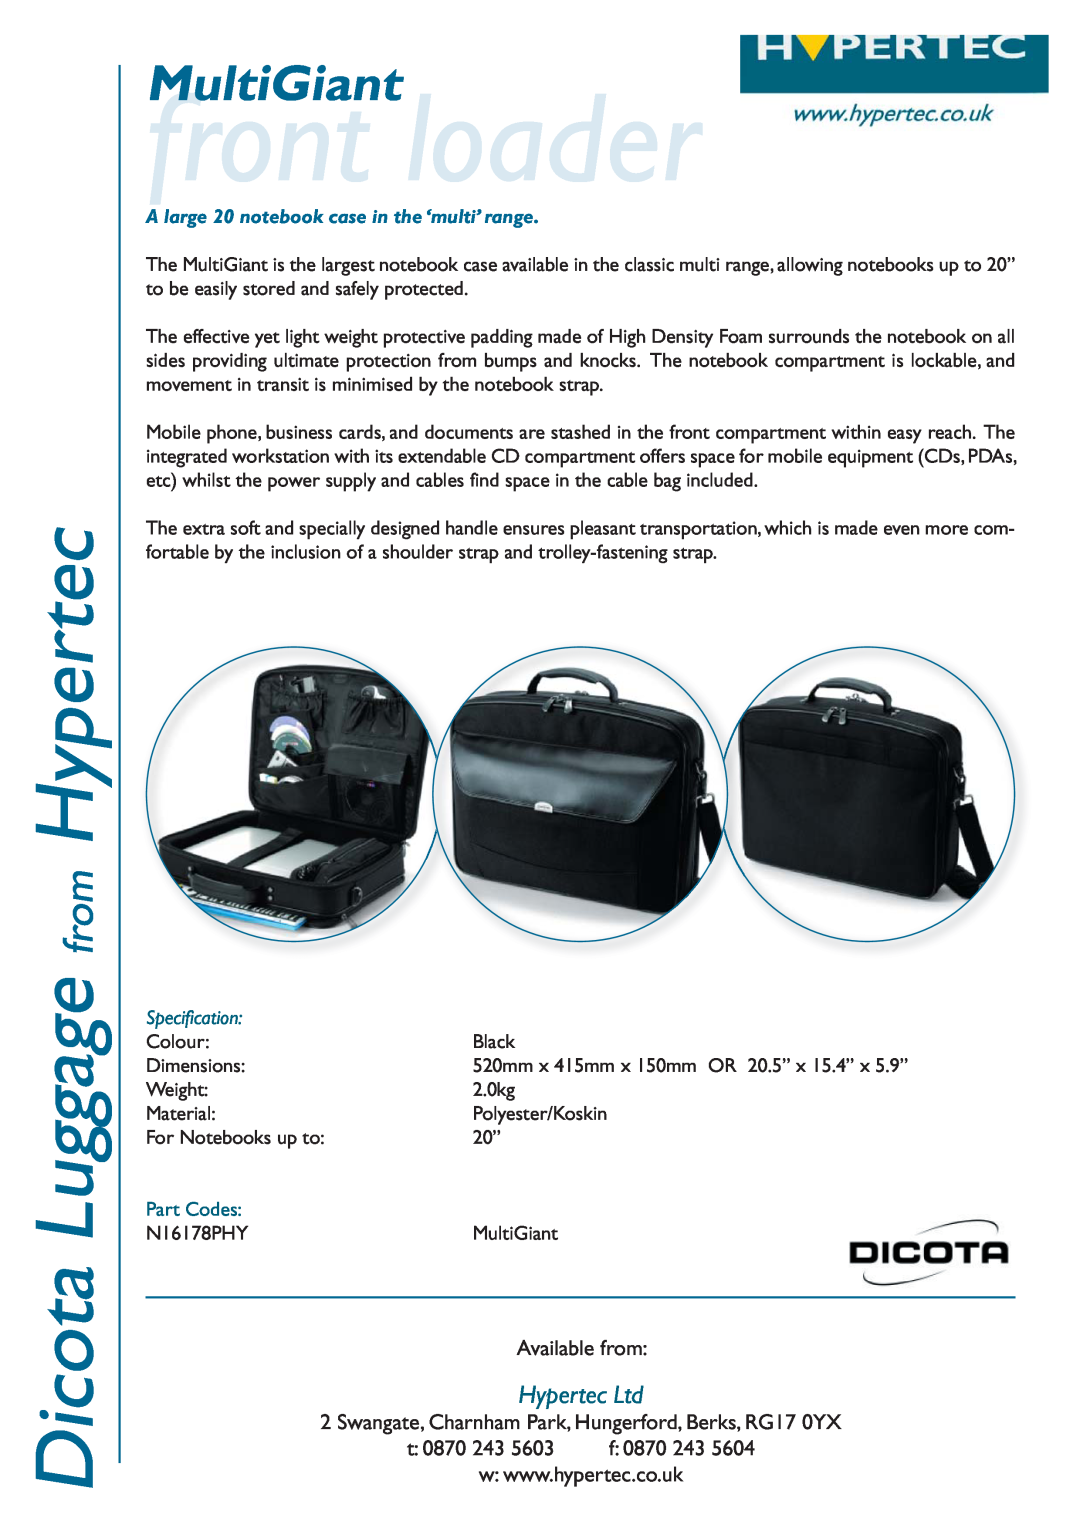 Hypertec N16178PHY dimensions front loader, Dicota Luggage from Hypertec, MultiGiant, Available from, t 0870 243 